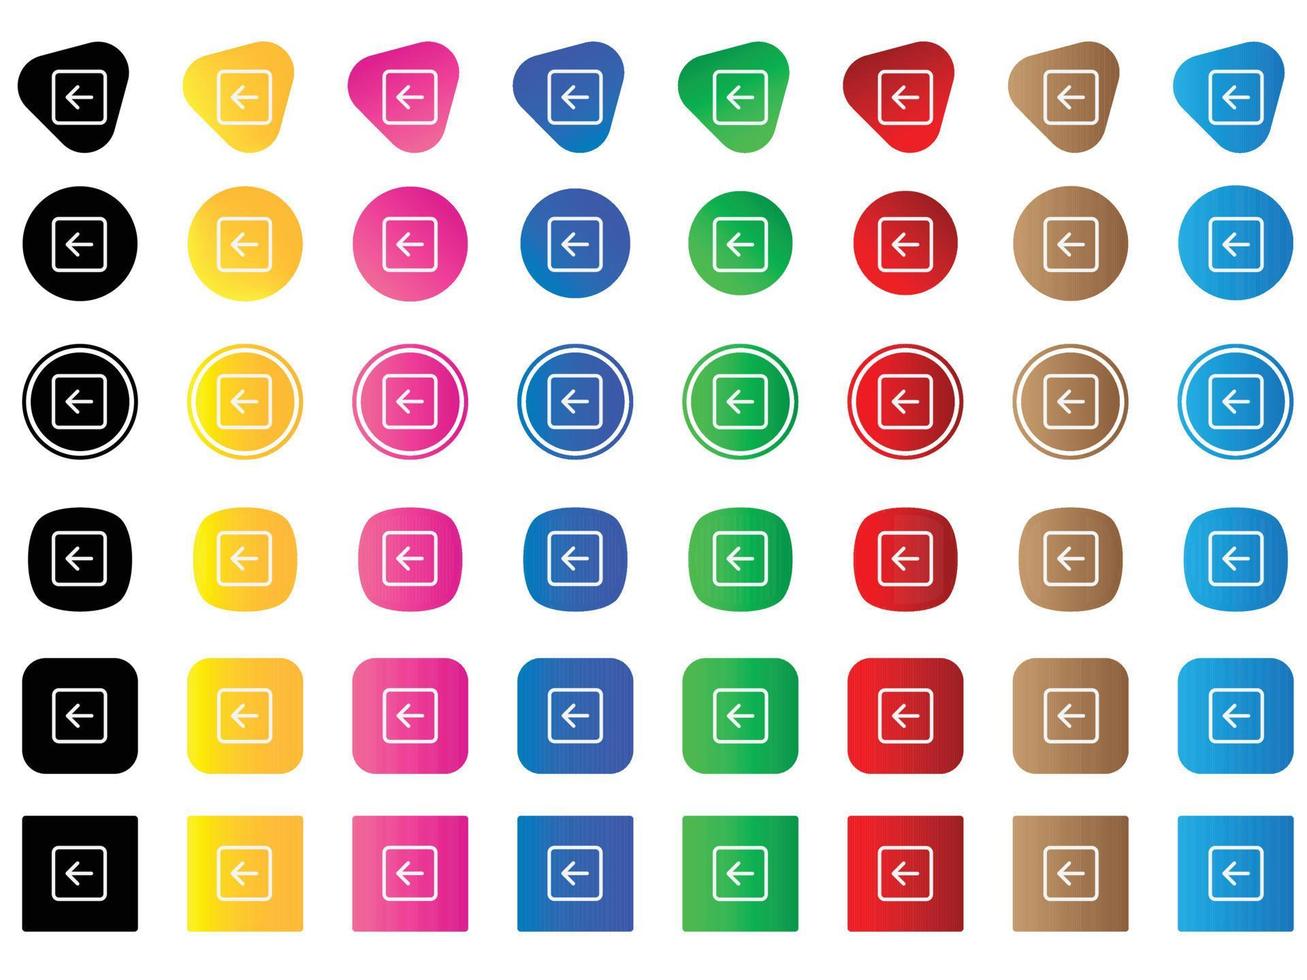 arrow left square icon . web icon set . icons collection. Simple vector illustration.